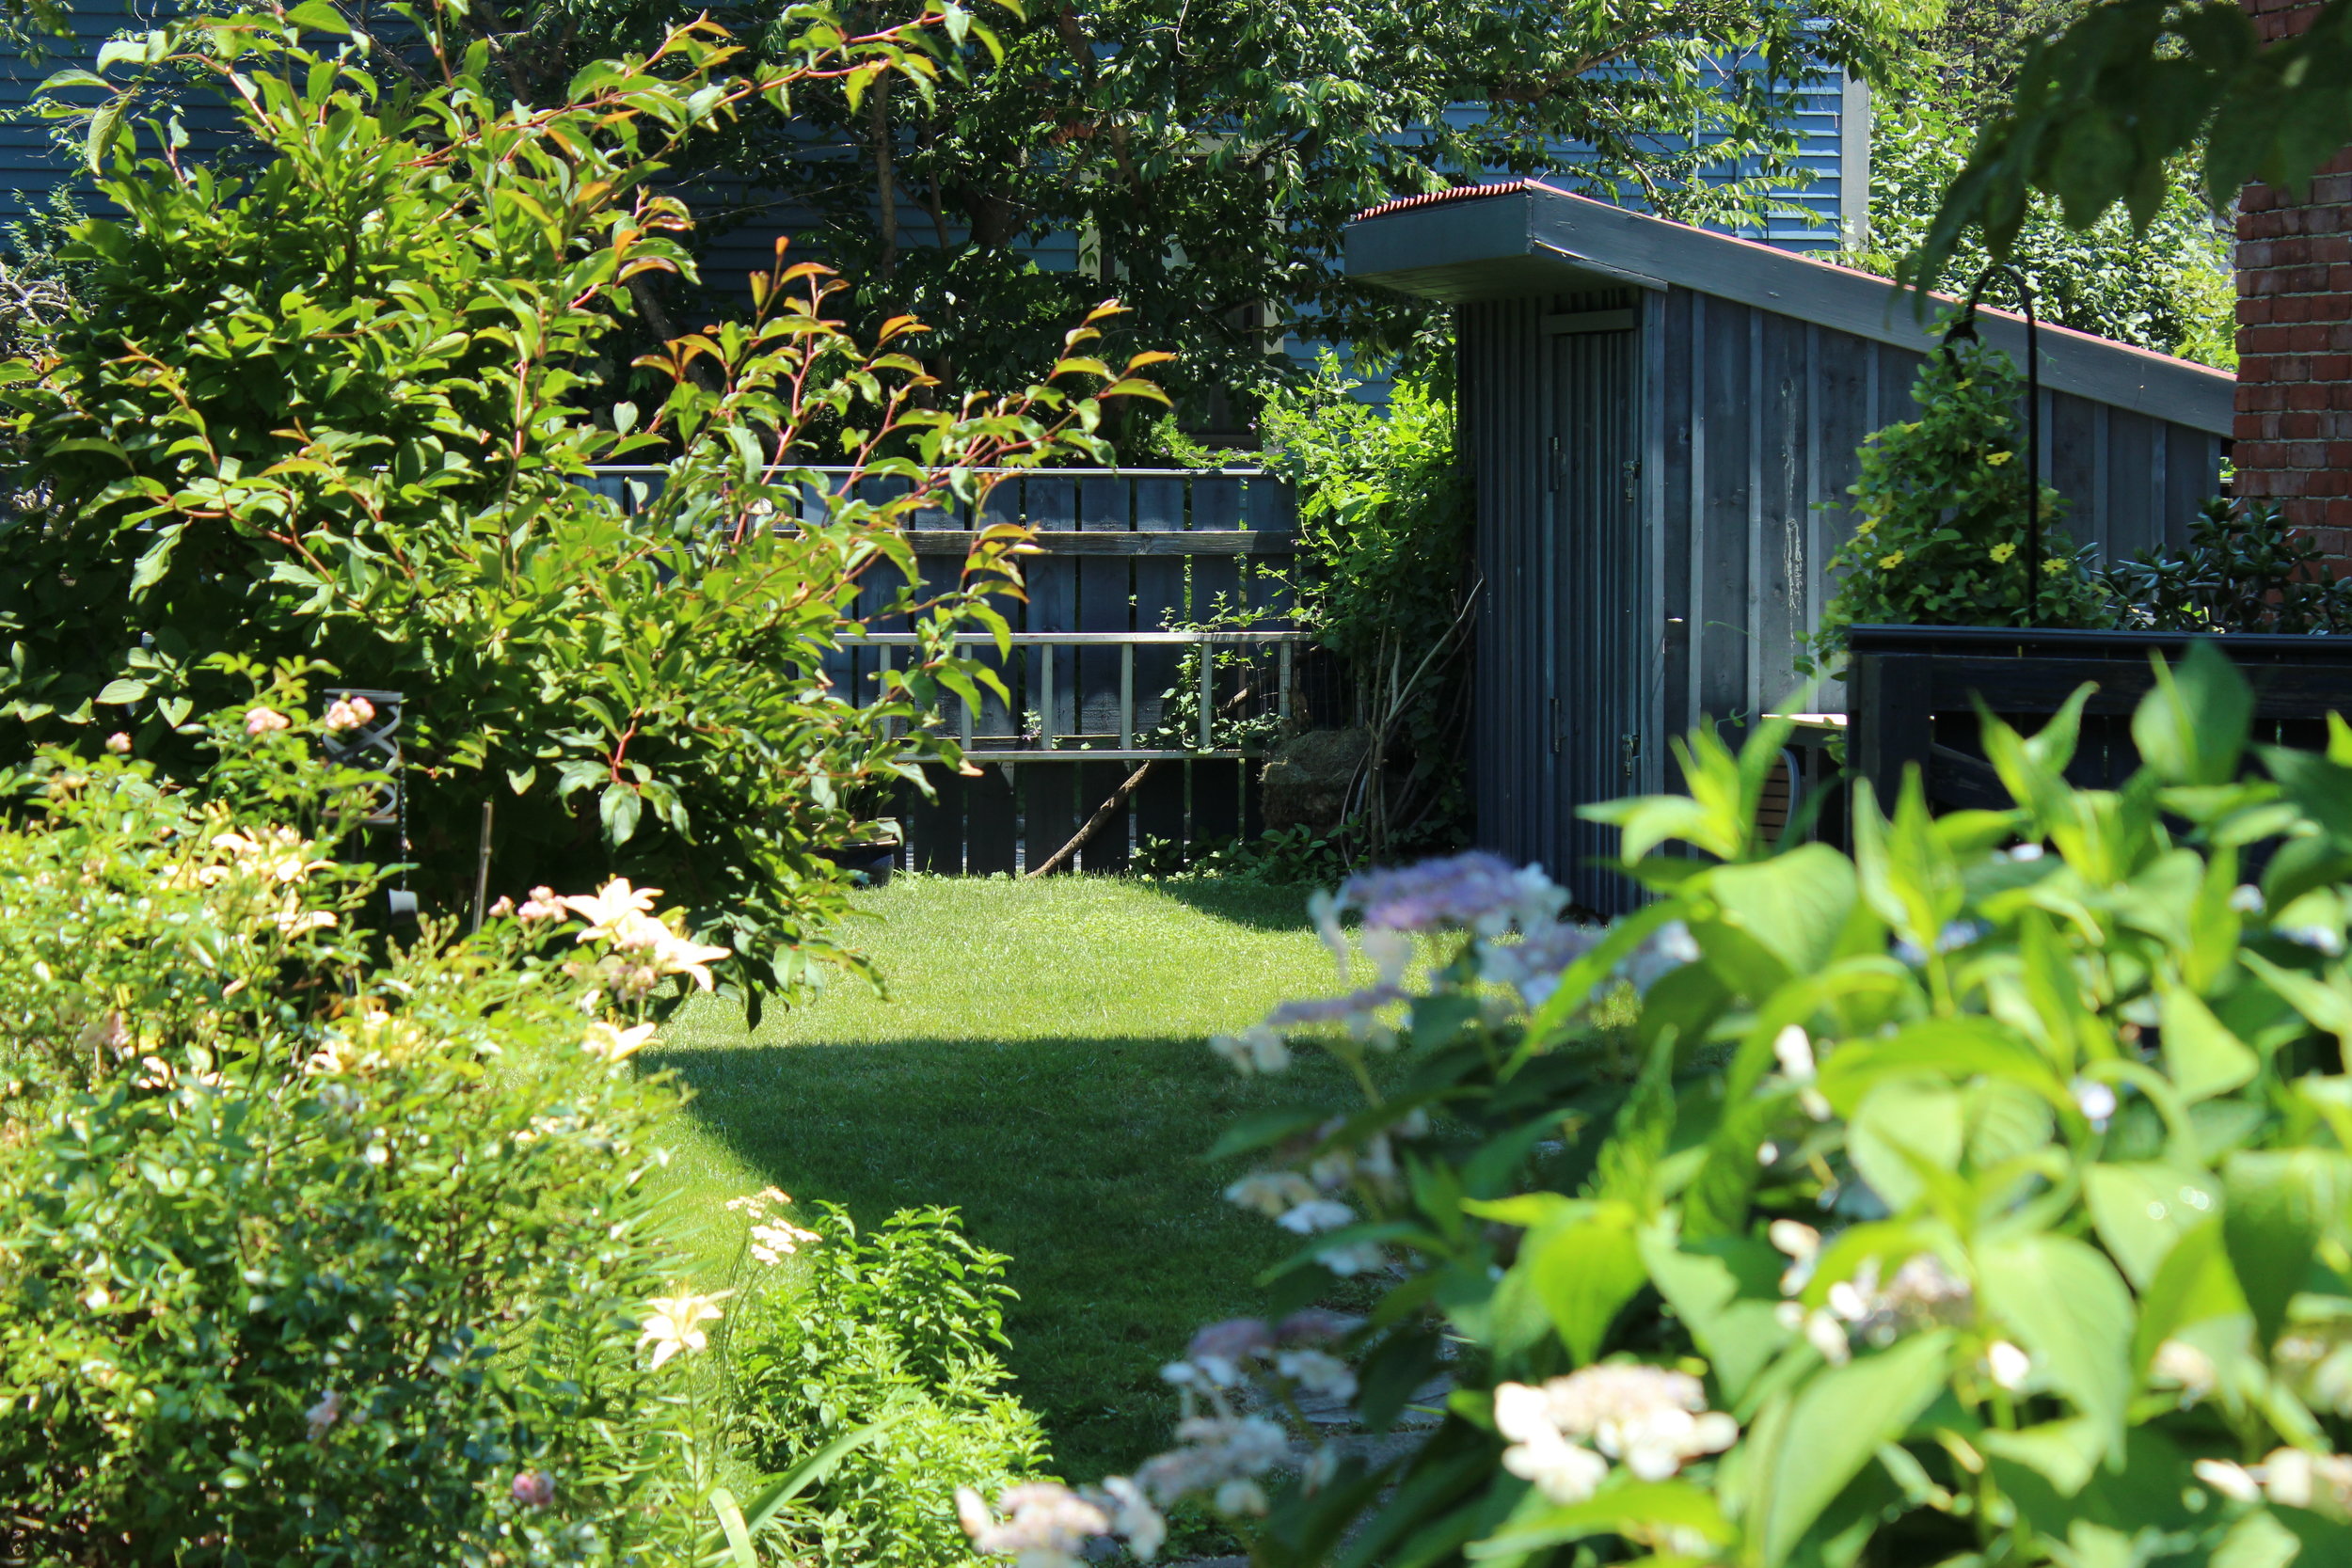   WBNA House Tour    The Gardens at 36 Harrison Street    Buy Tickets  